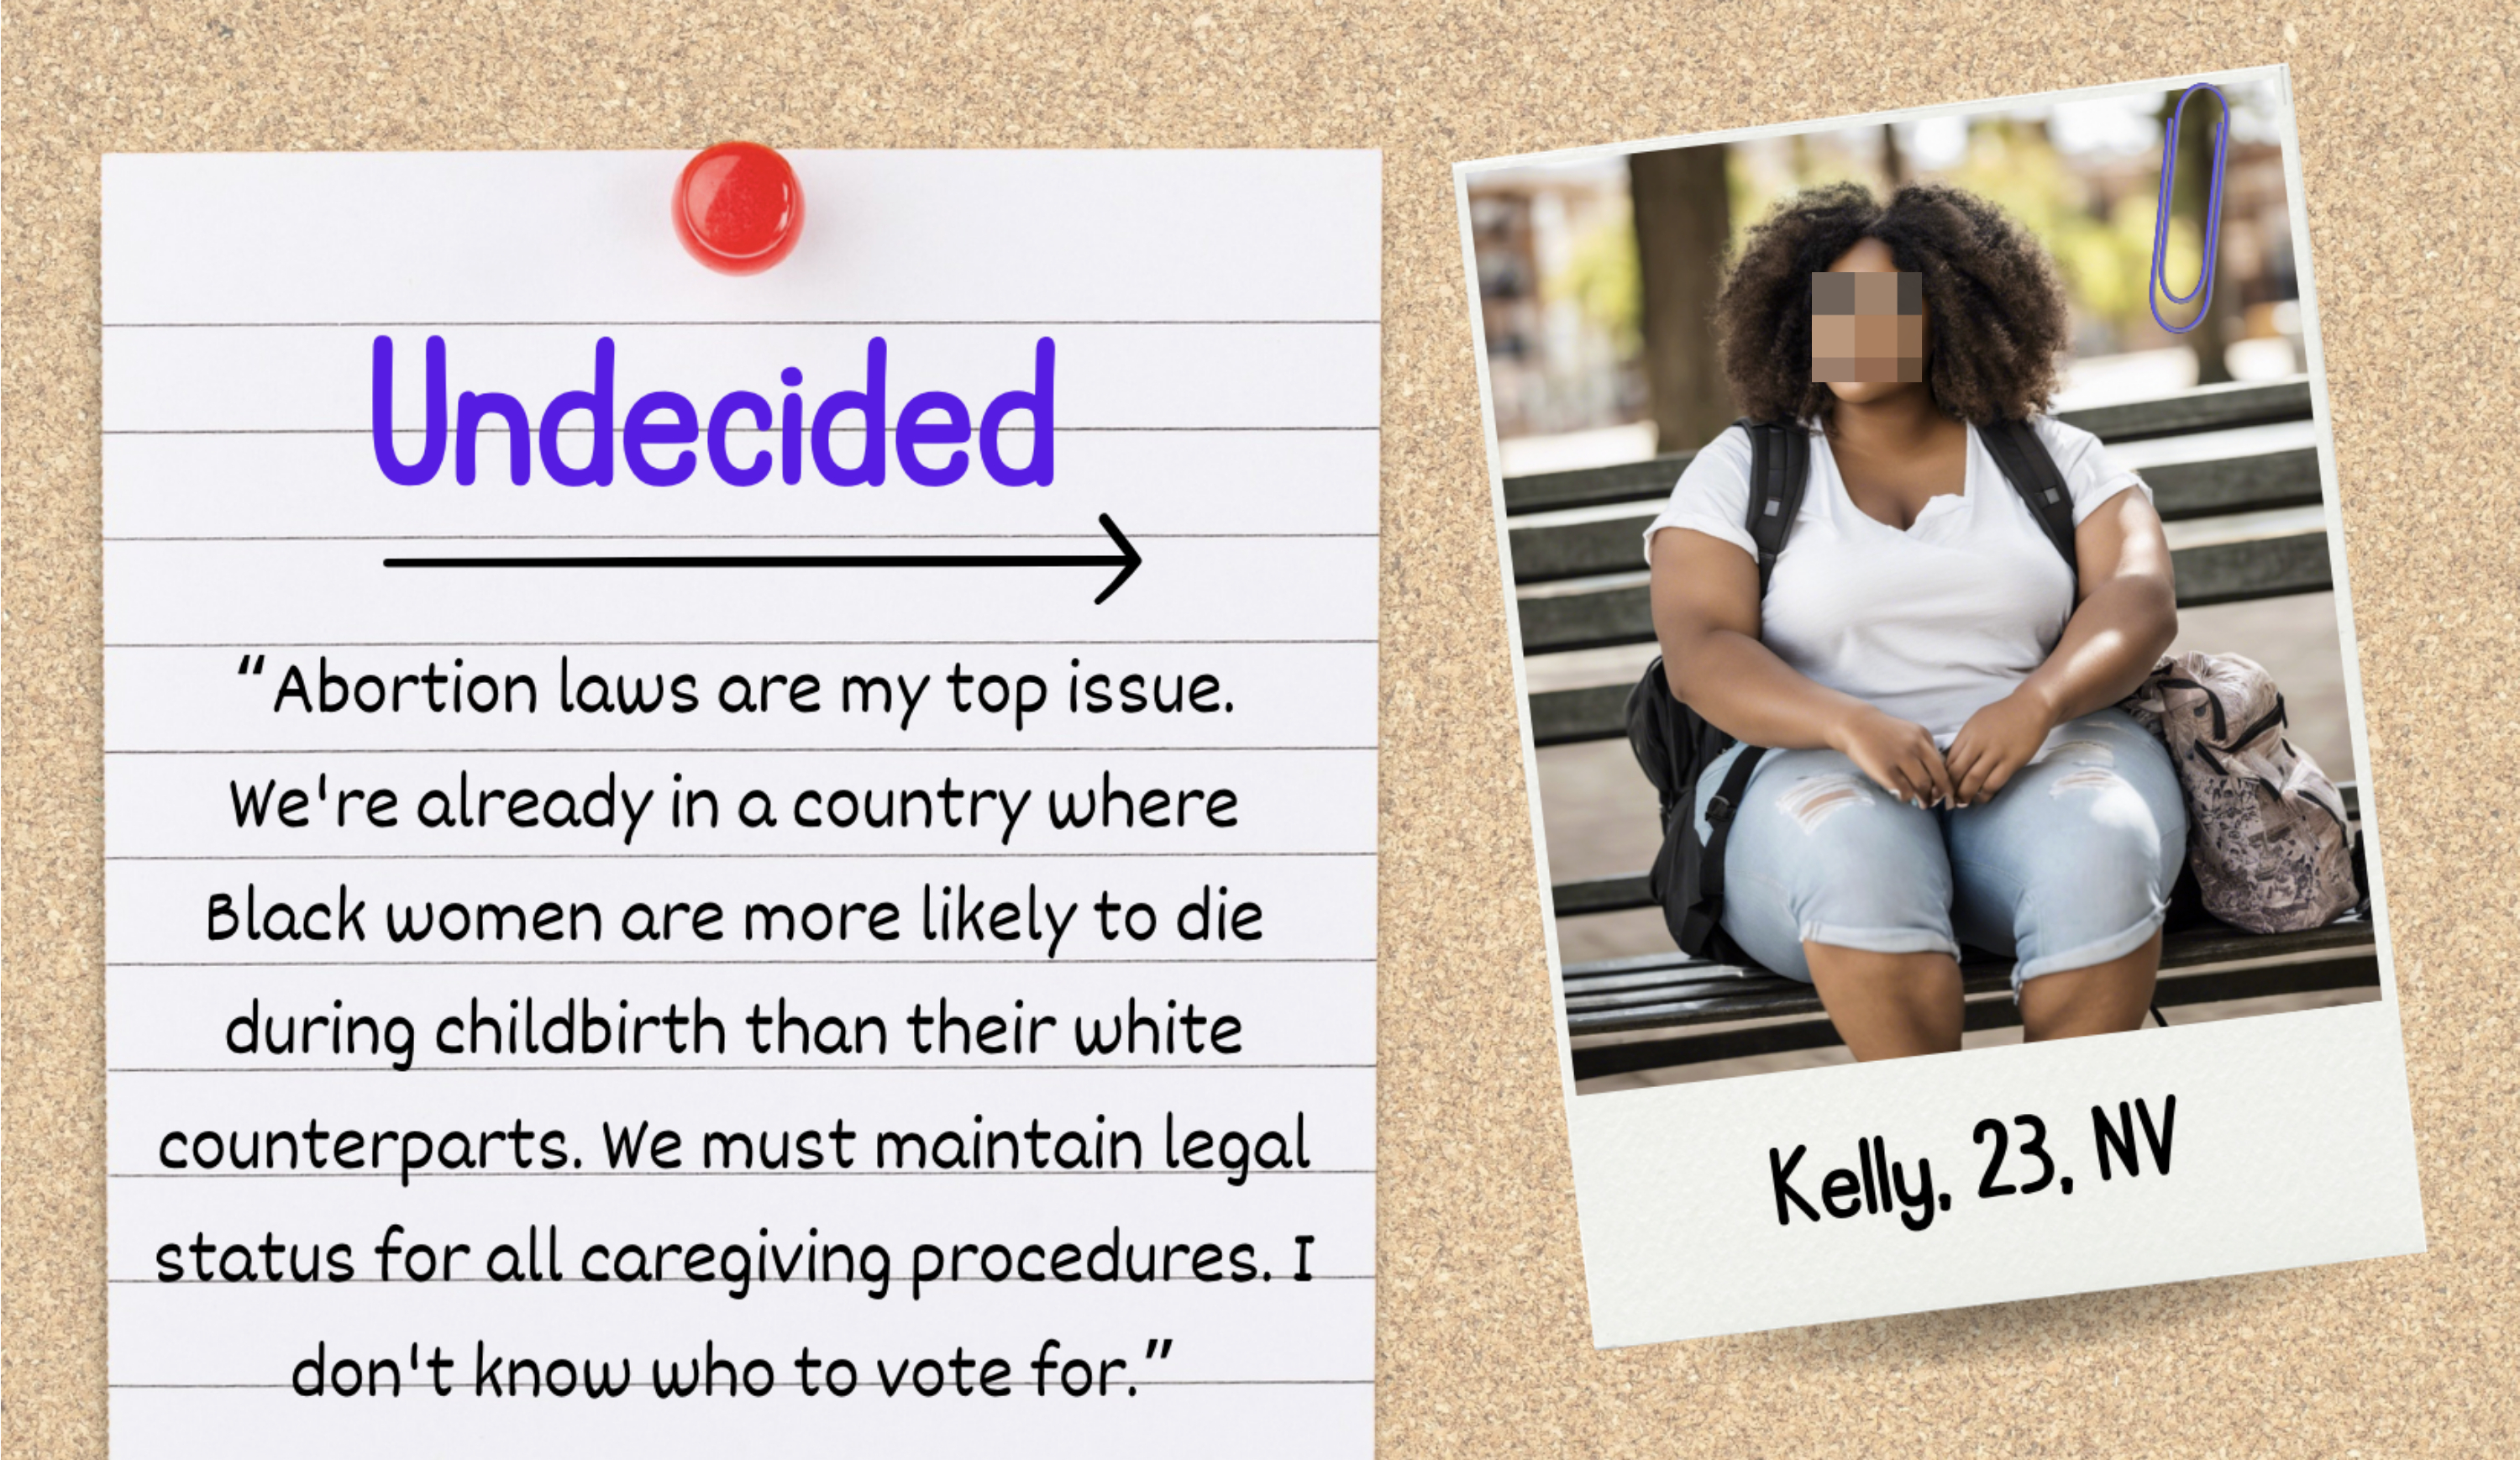 Voting diary from an undecided voter who cites abortion laws at their top issue